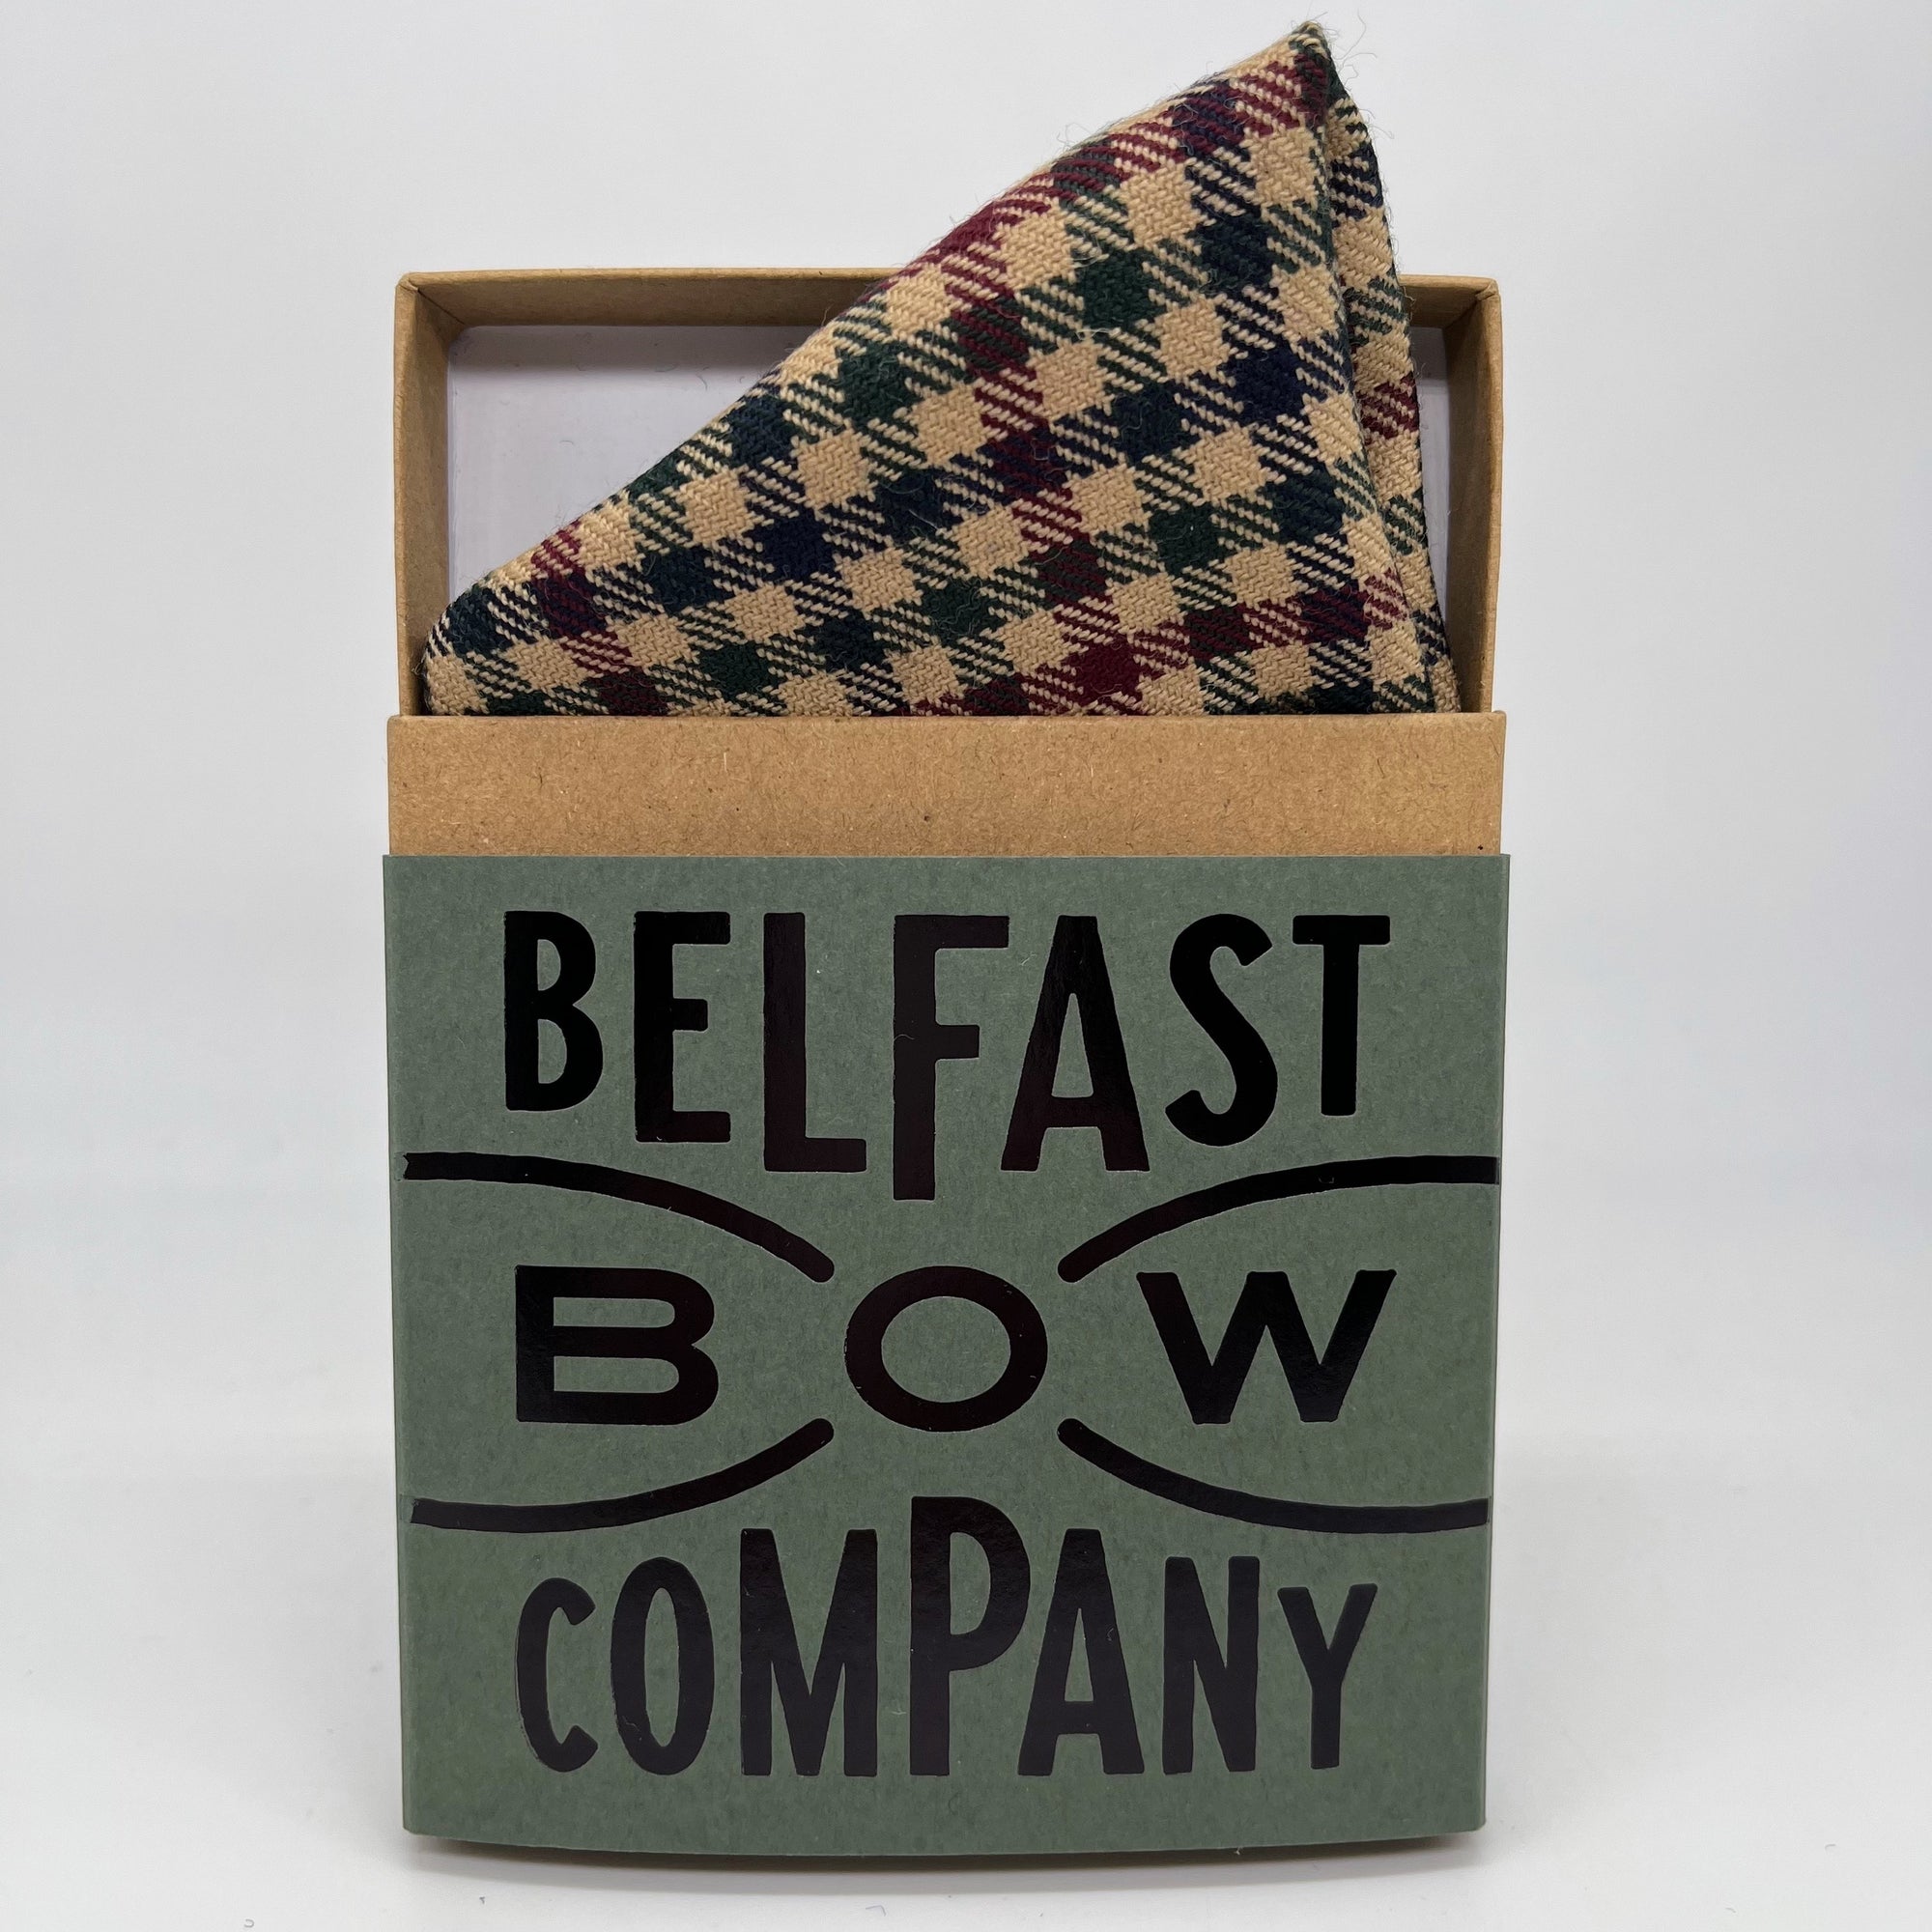 Checked Pocket Square in Burgundy, Green, Navy by the Belfast Bow Company